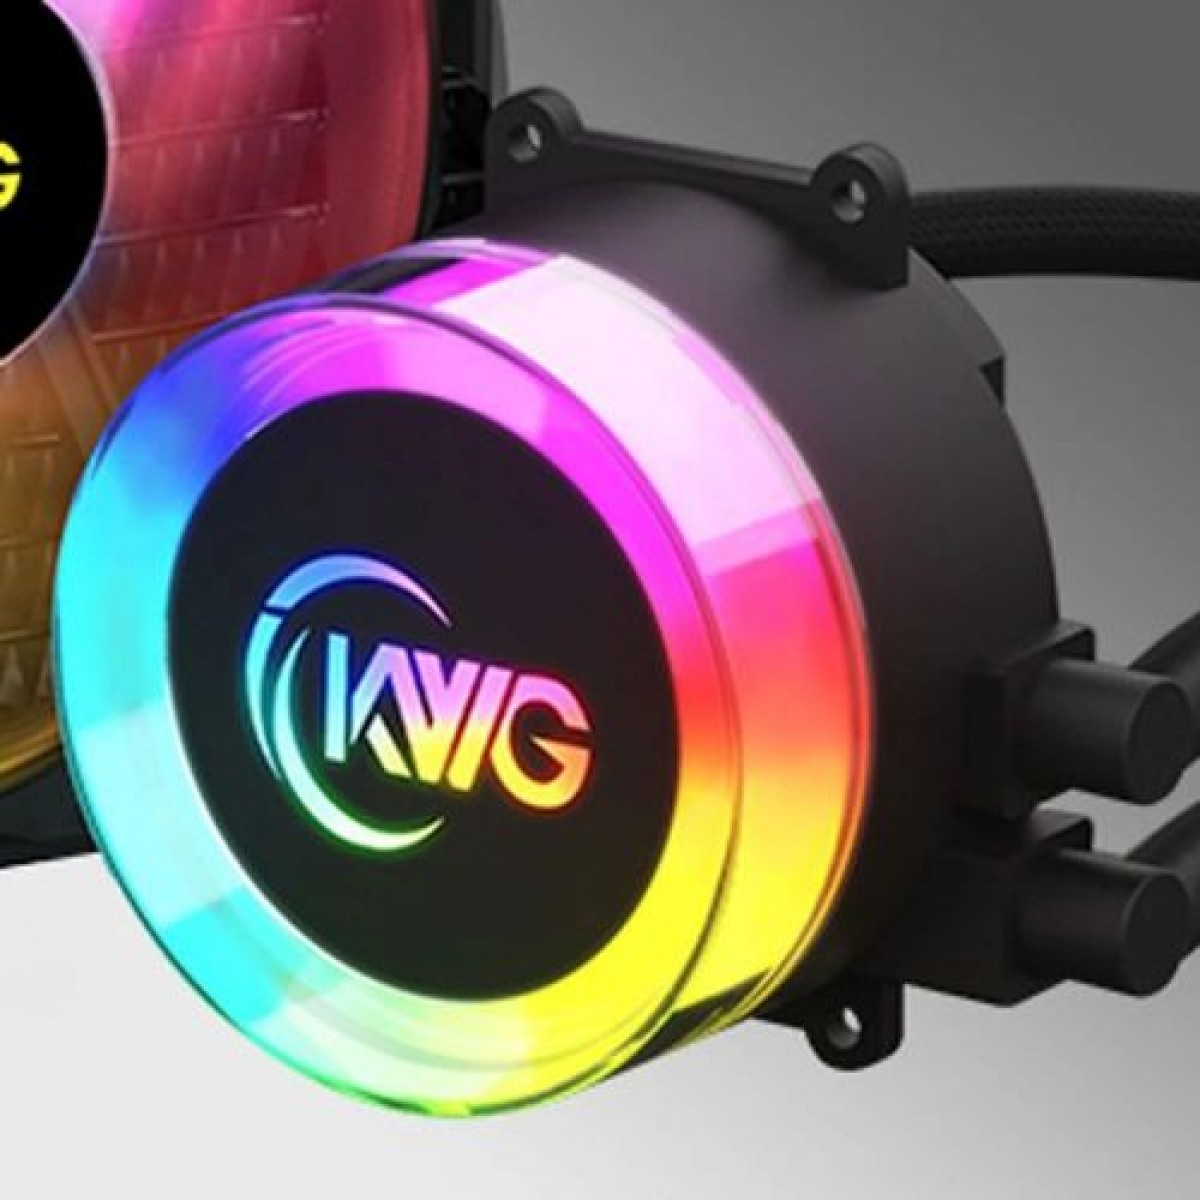 Water Cooler KWG Crater E1 120 Lite, 120mm, RGB, Intel-AMD, CRATER E1-120 LITE